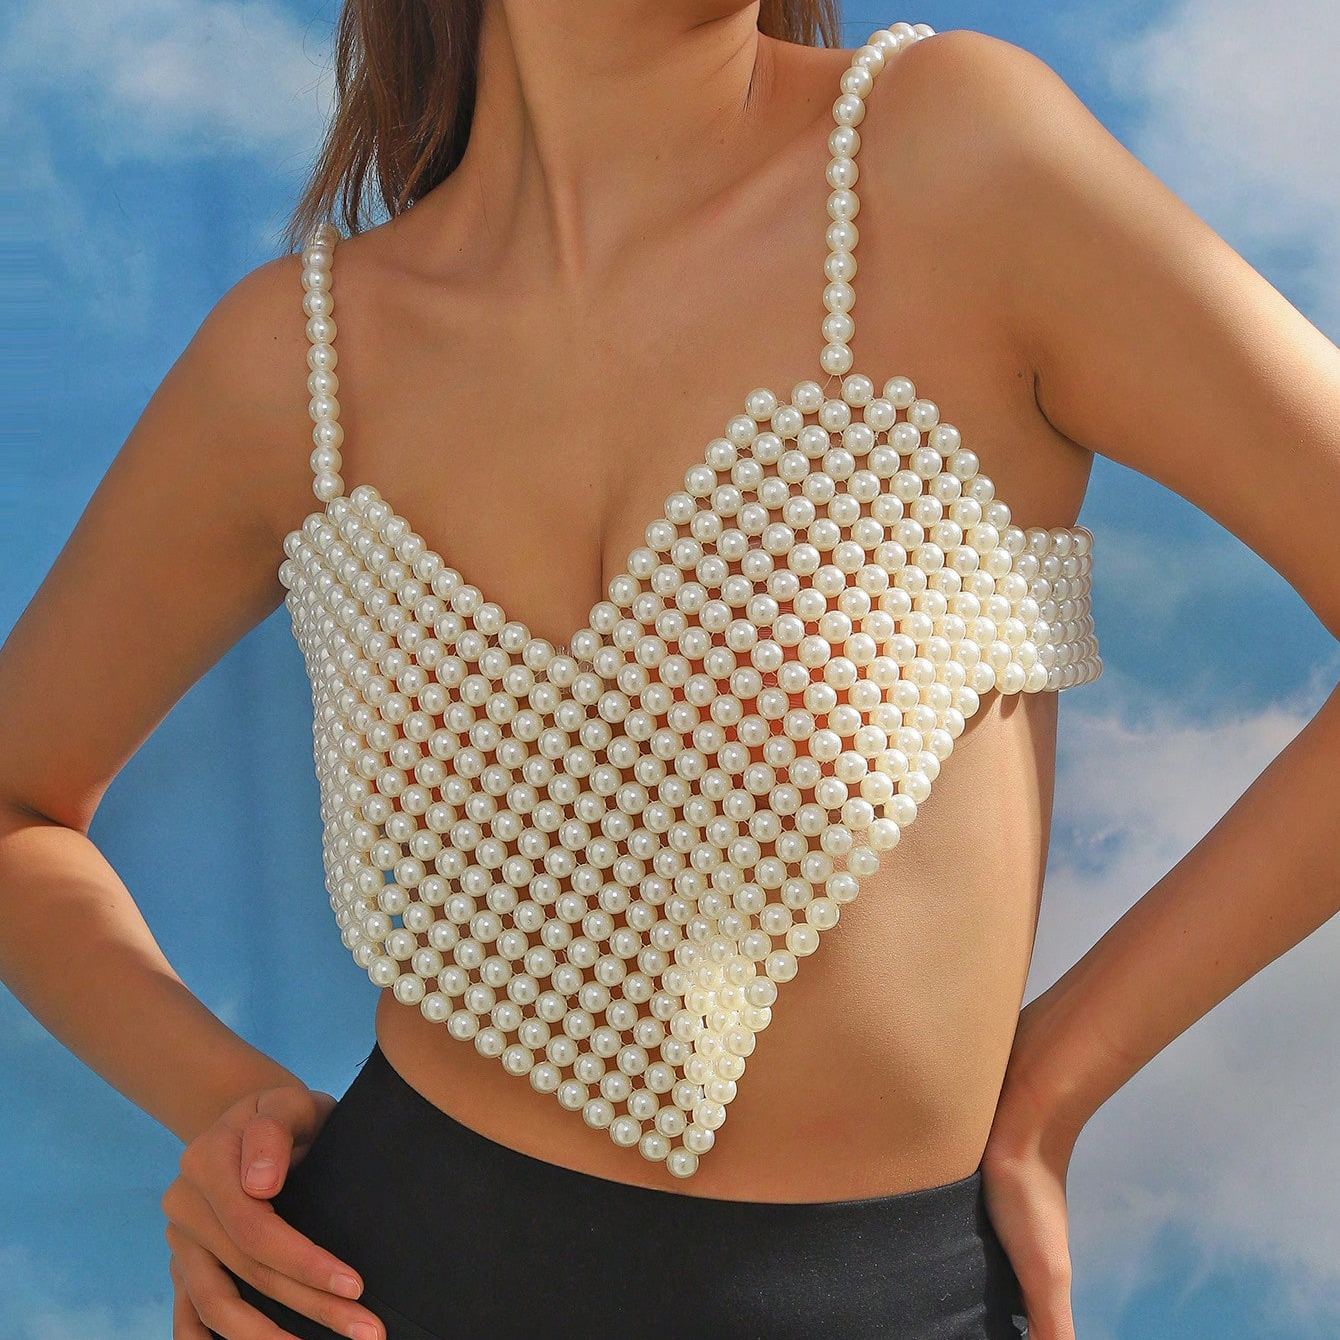 White Beads Pearl Crop Top, Body Jewelry